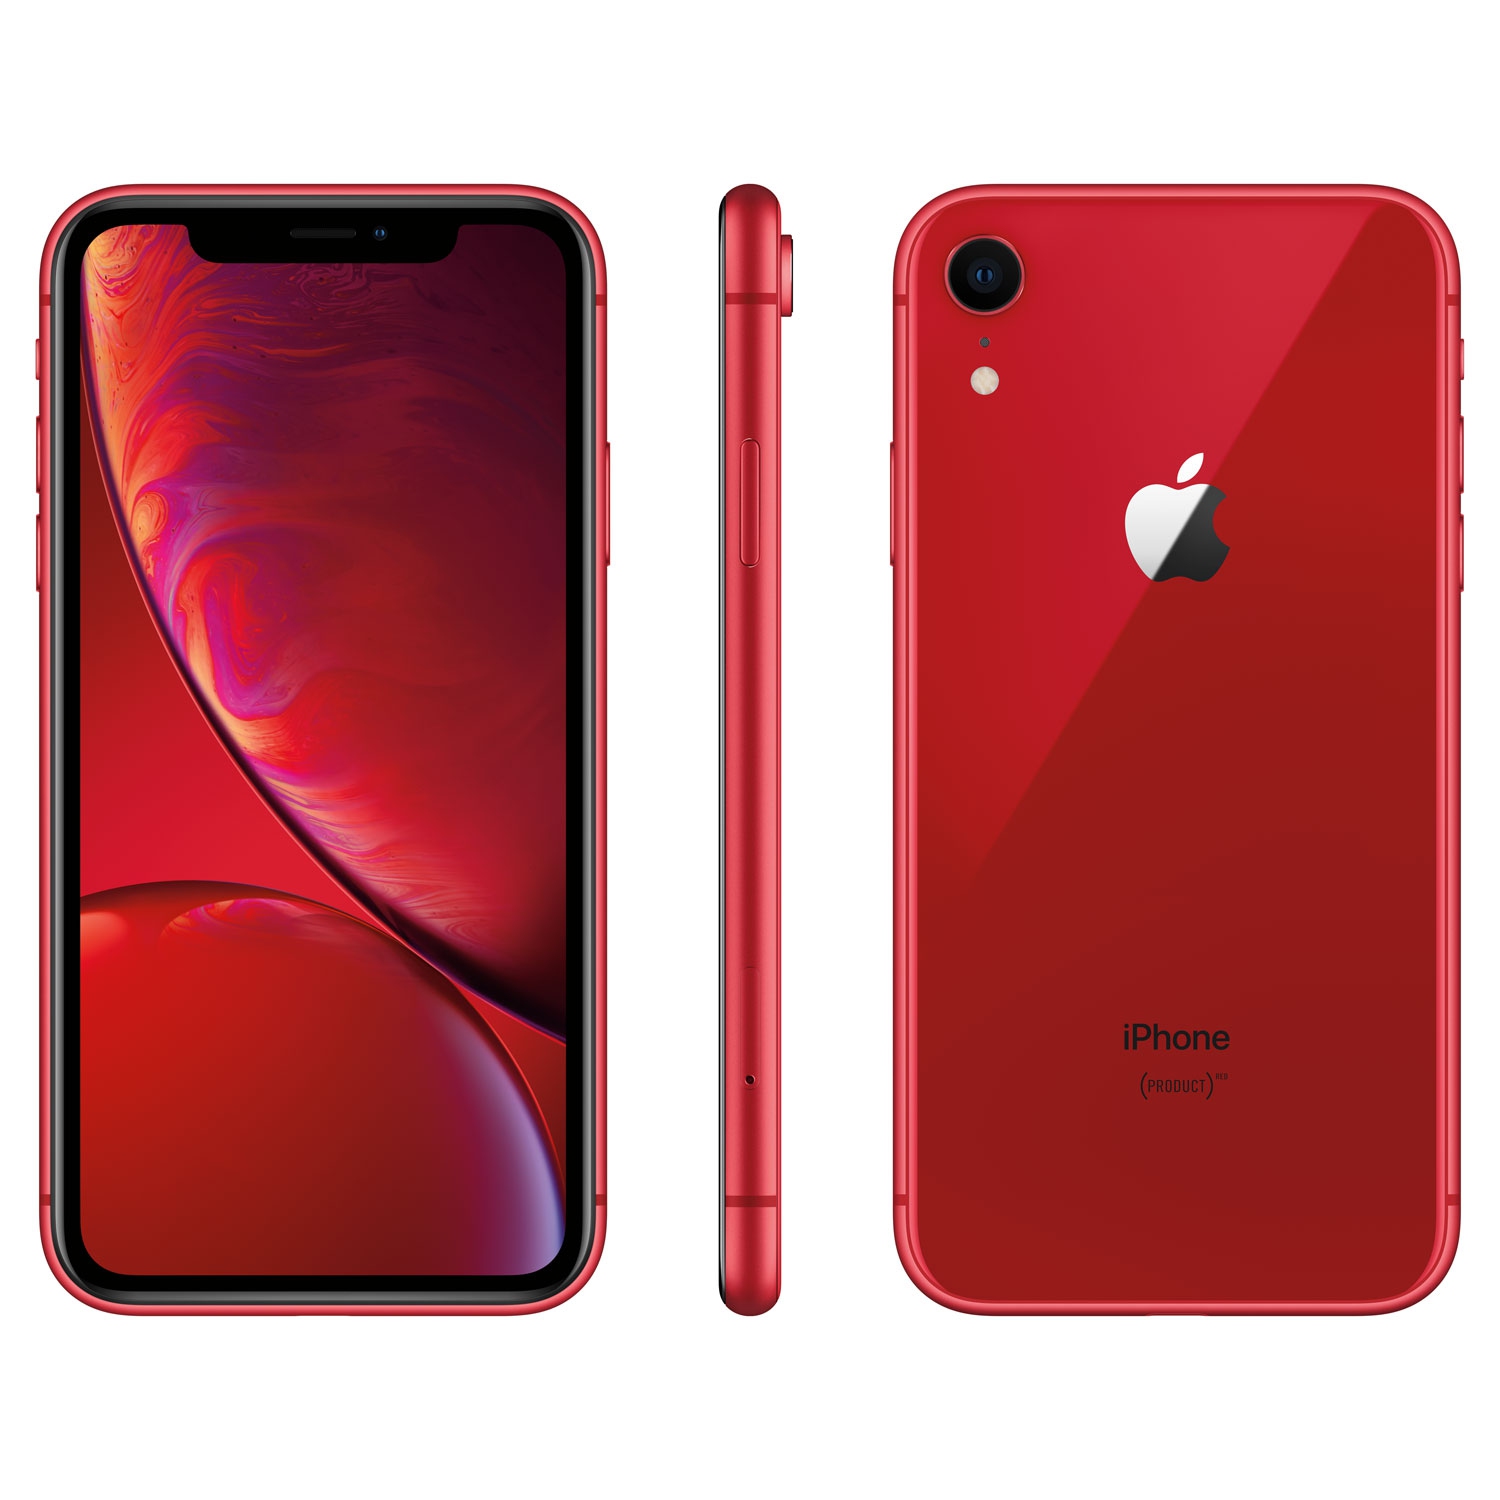 Apple iPhone XR 128GB Smartphone - (Product)RED - Unlocked - Open 